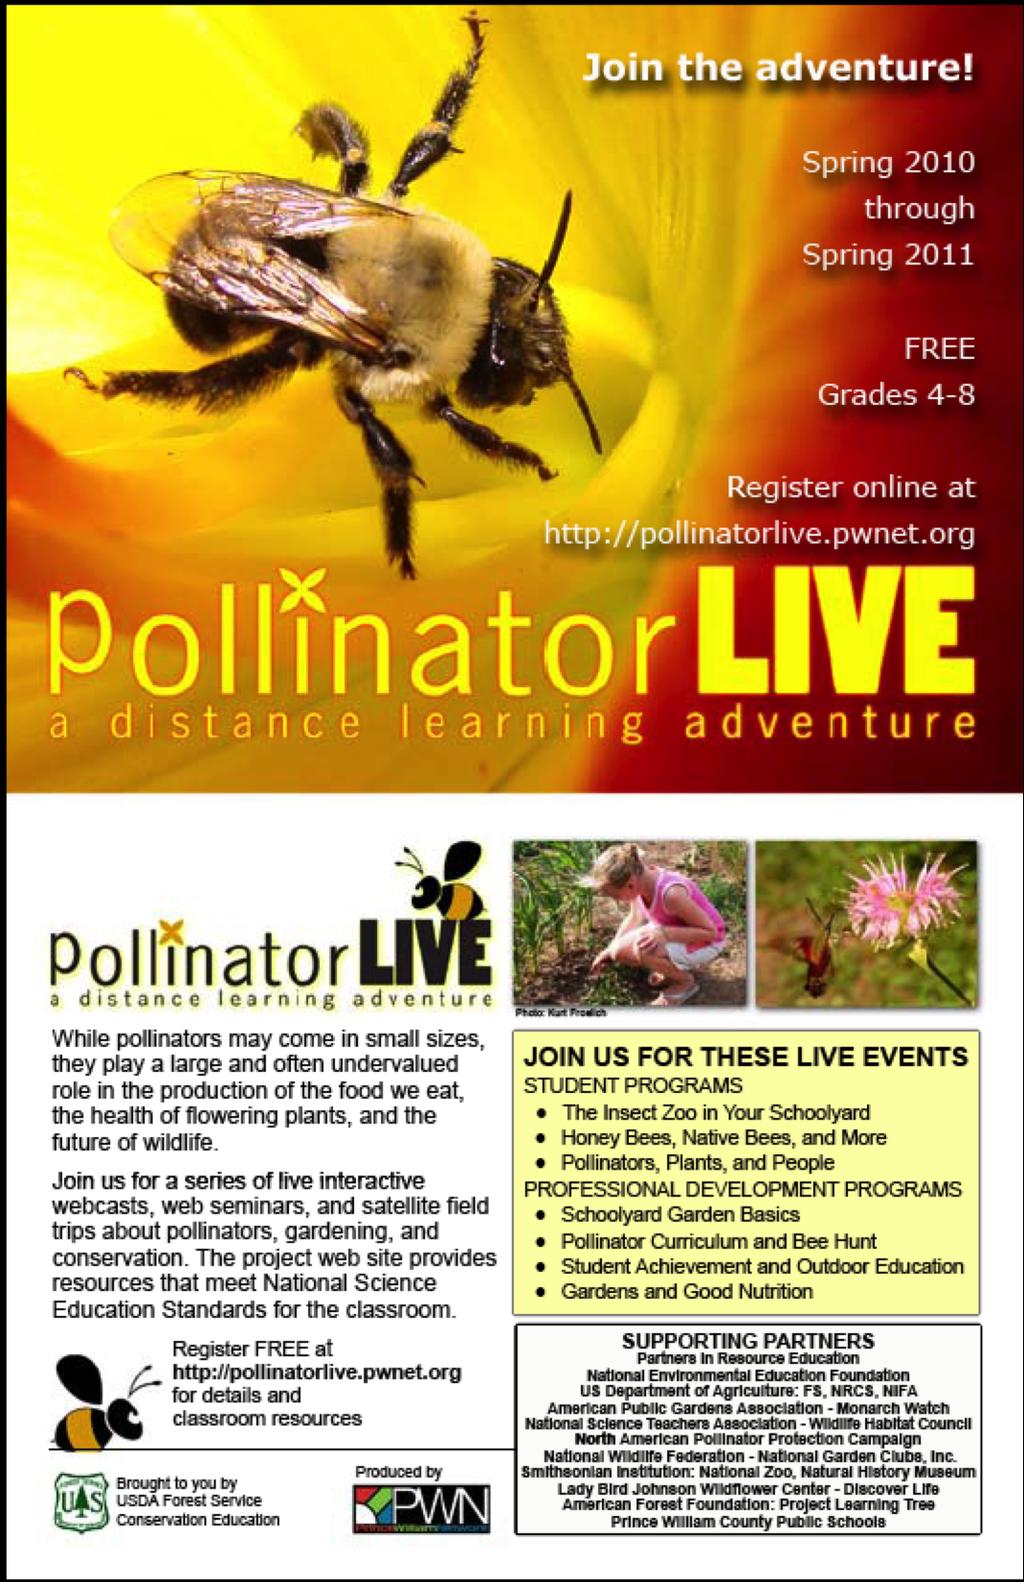 Page 6 Pollinator Live a distance learning adventure http://pollinatorlive.pwnet.org/teacher/index.